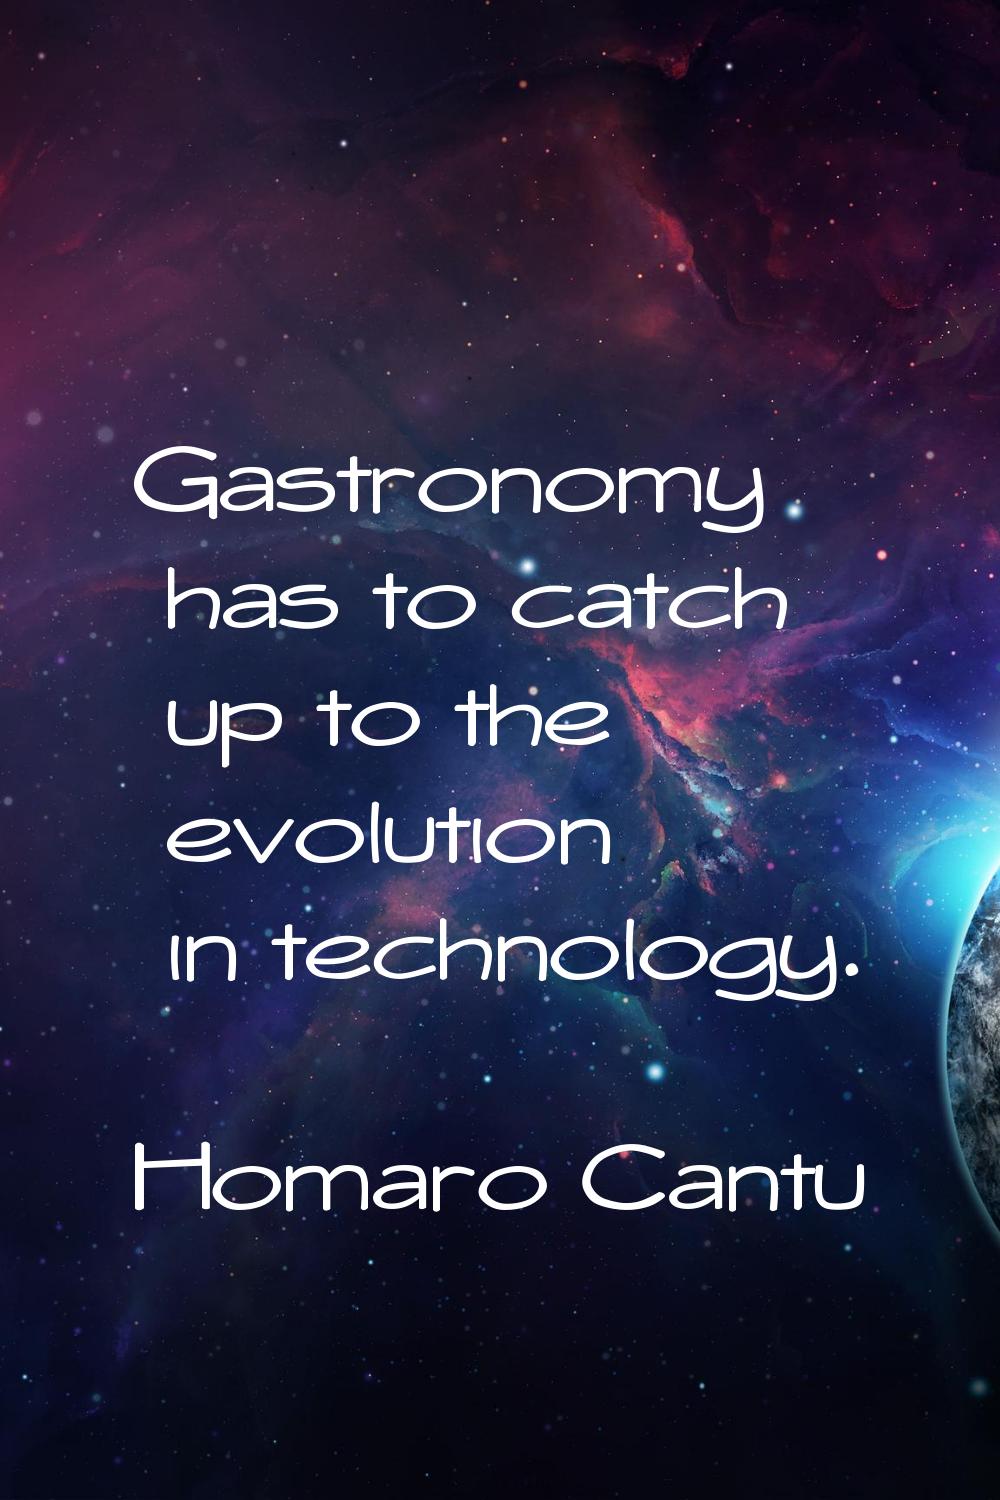 Gastronomy has to catch up to the evolution in technology.